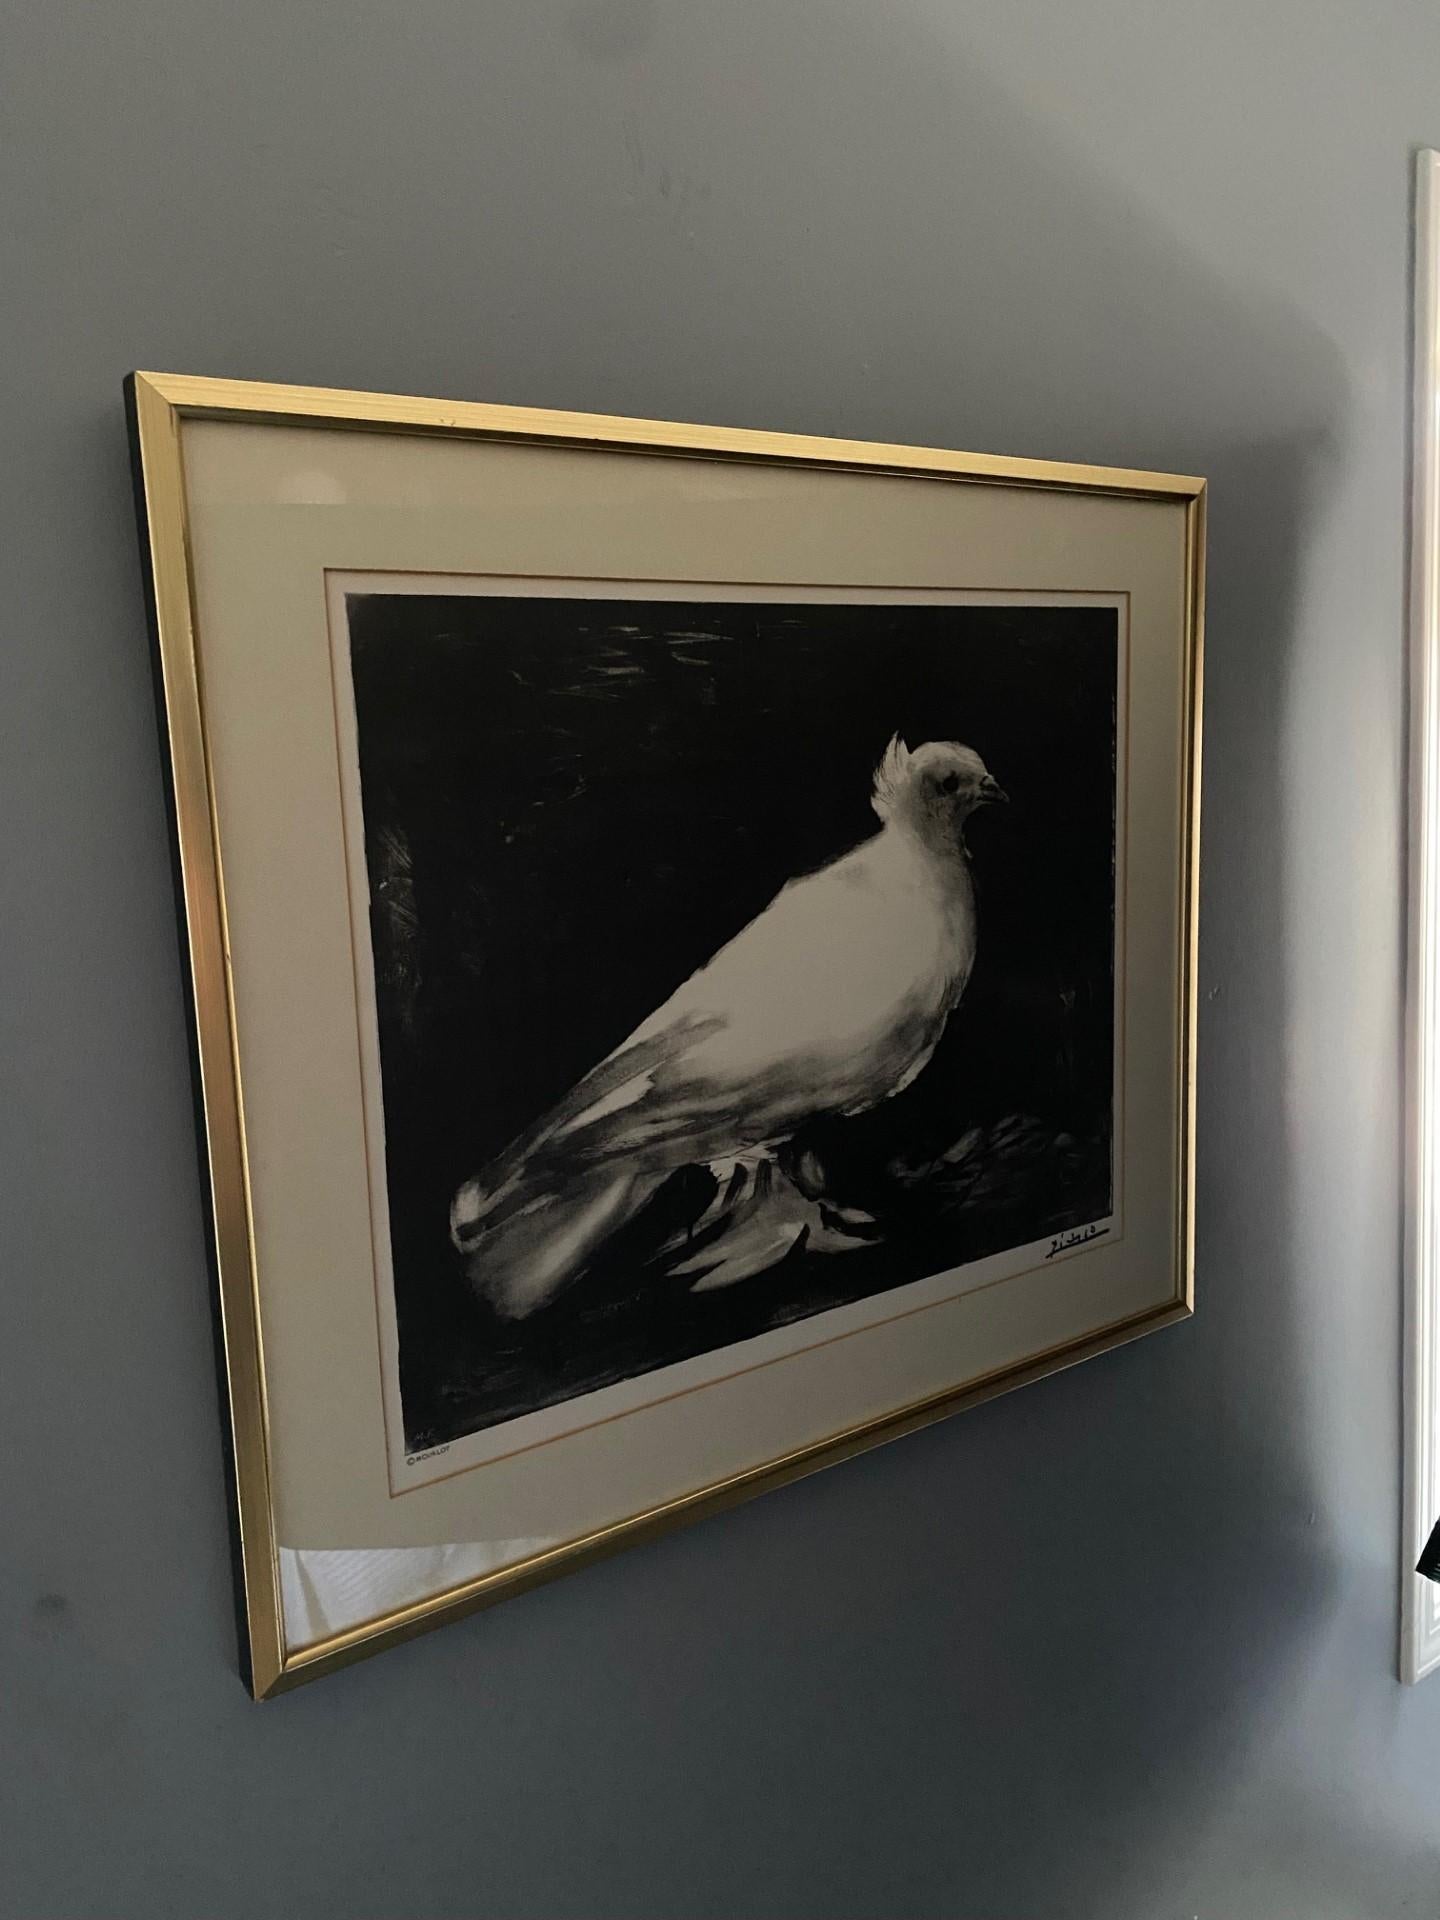 Lithograph of “Dove” (French: La Colombe) a 1949 work on paper created by Pablo Picasso in 1949. The lithograph displays a white dove on a black background, which is widely considered to be a symbol of peace. Originally, this work was used to